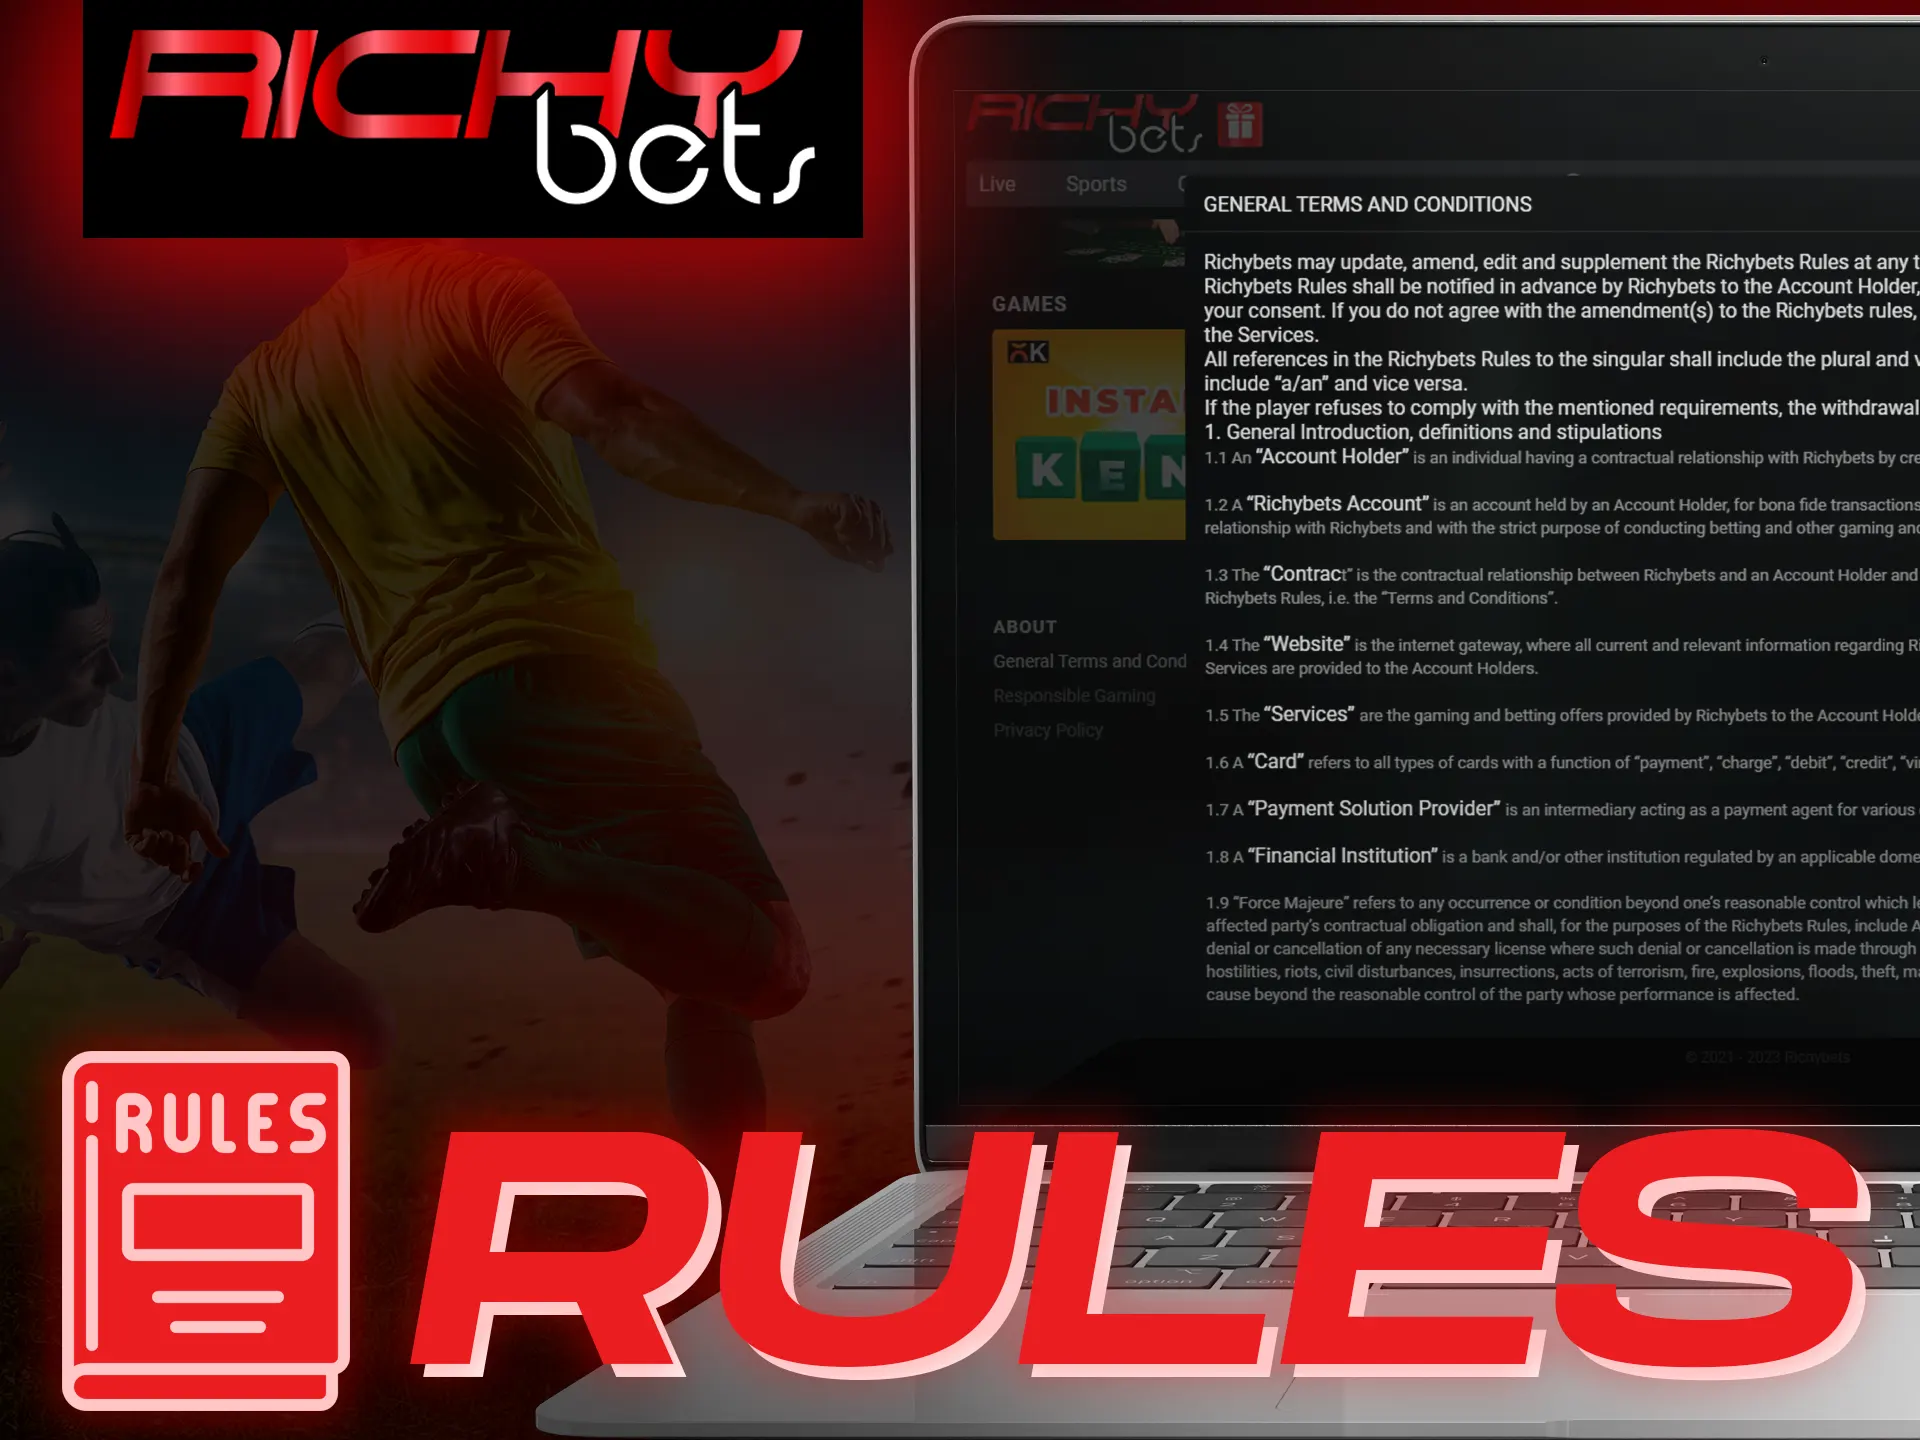 Follow the Richybets rules when you making a new bet.